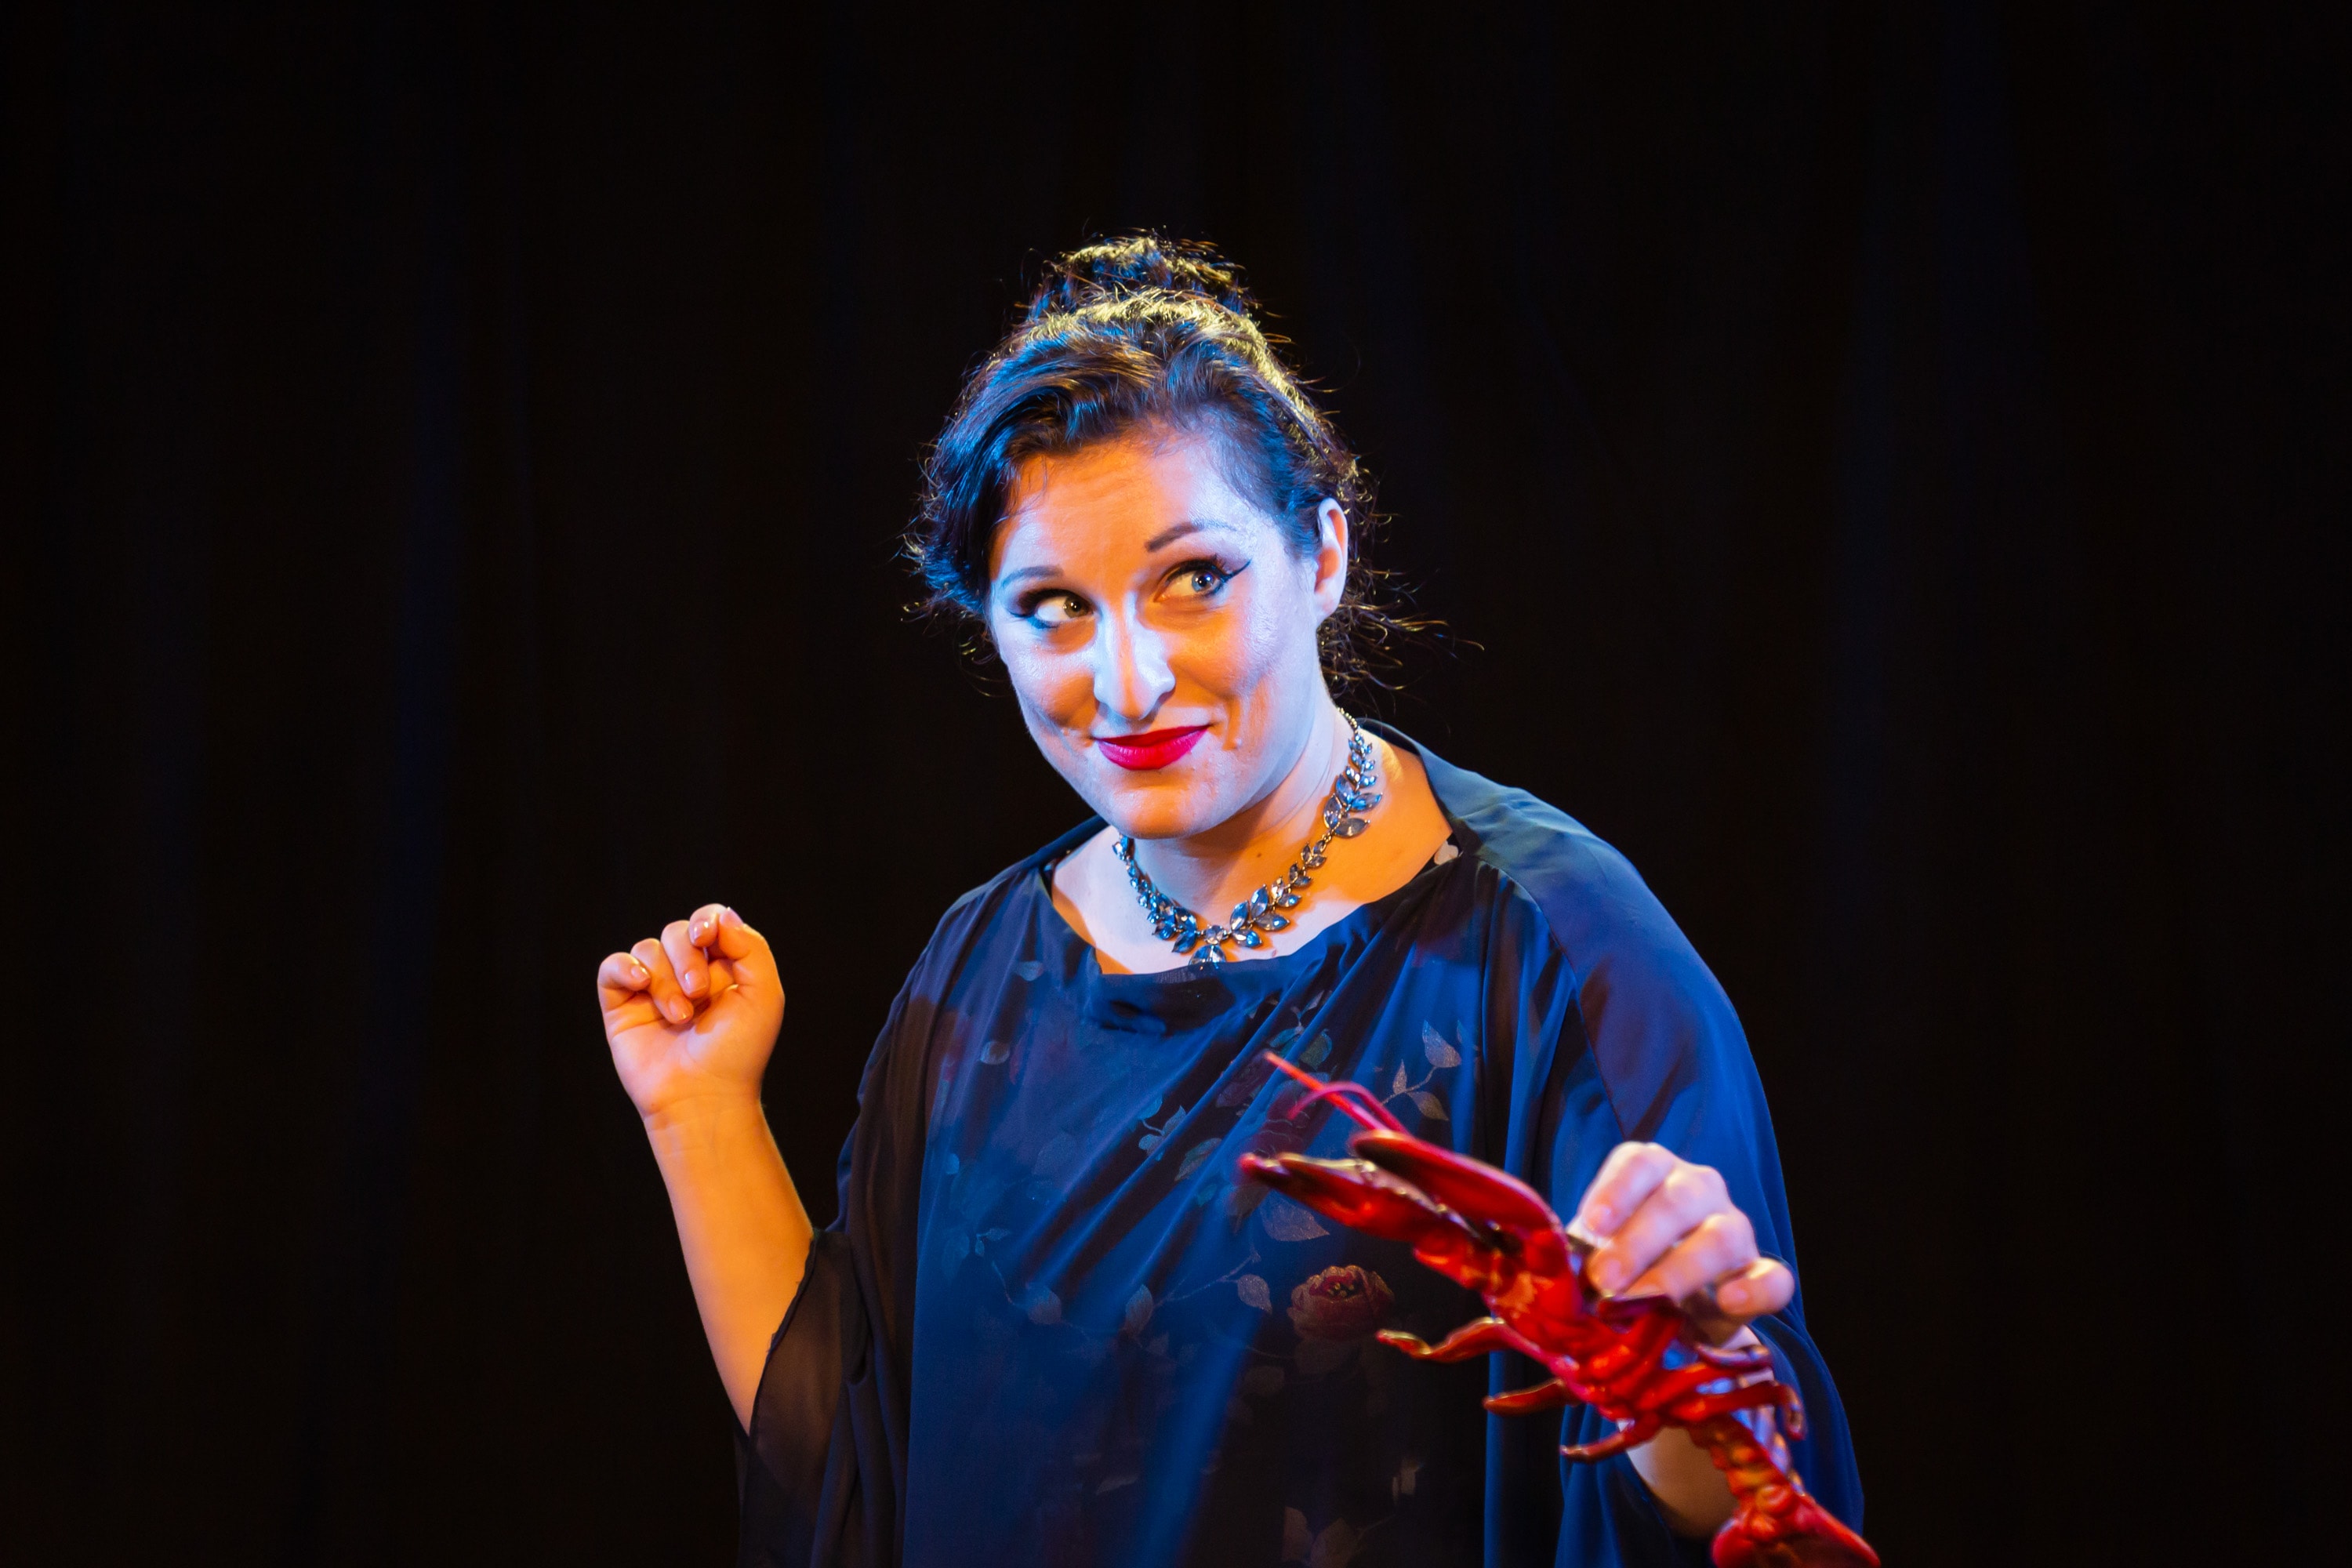 Alani Kravitz as Paige in Dinner, now playing at 4615 Theatre Company. Photo by Ryan Maxwell Photography.